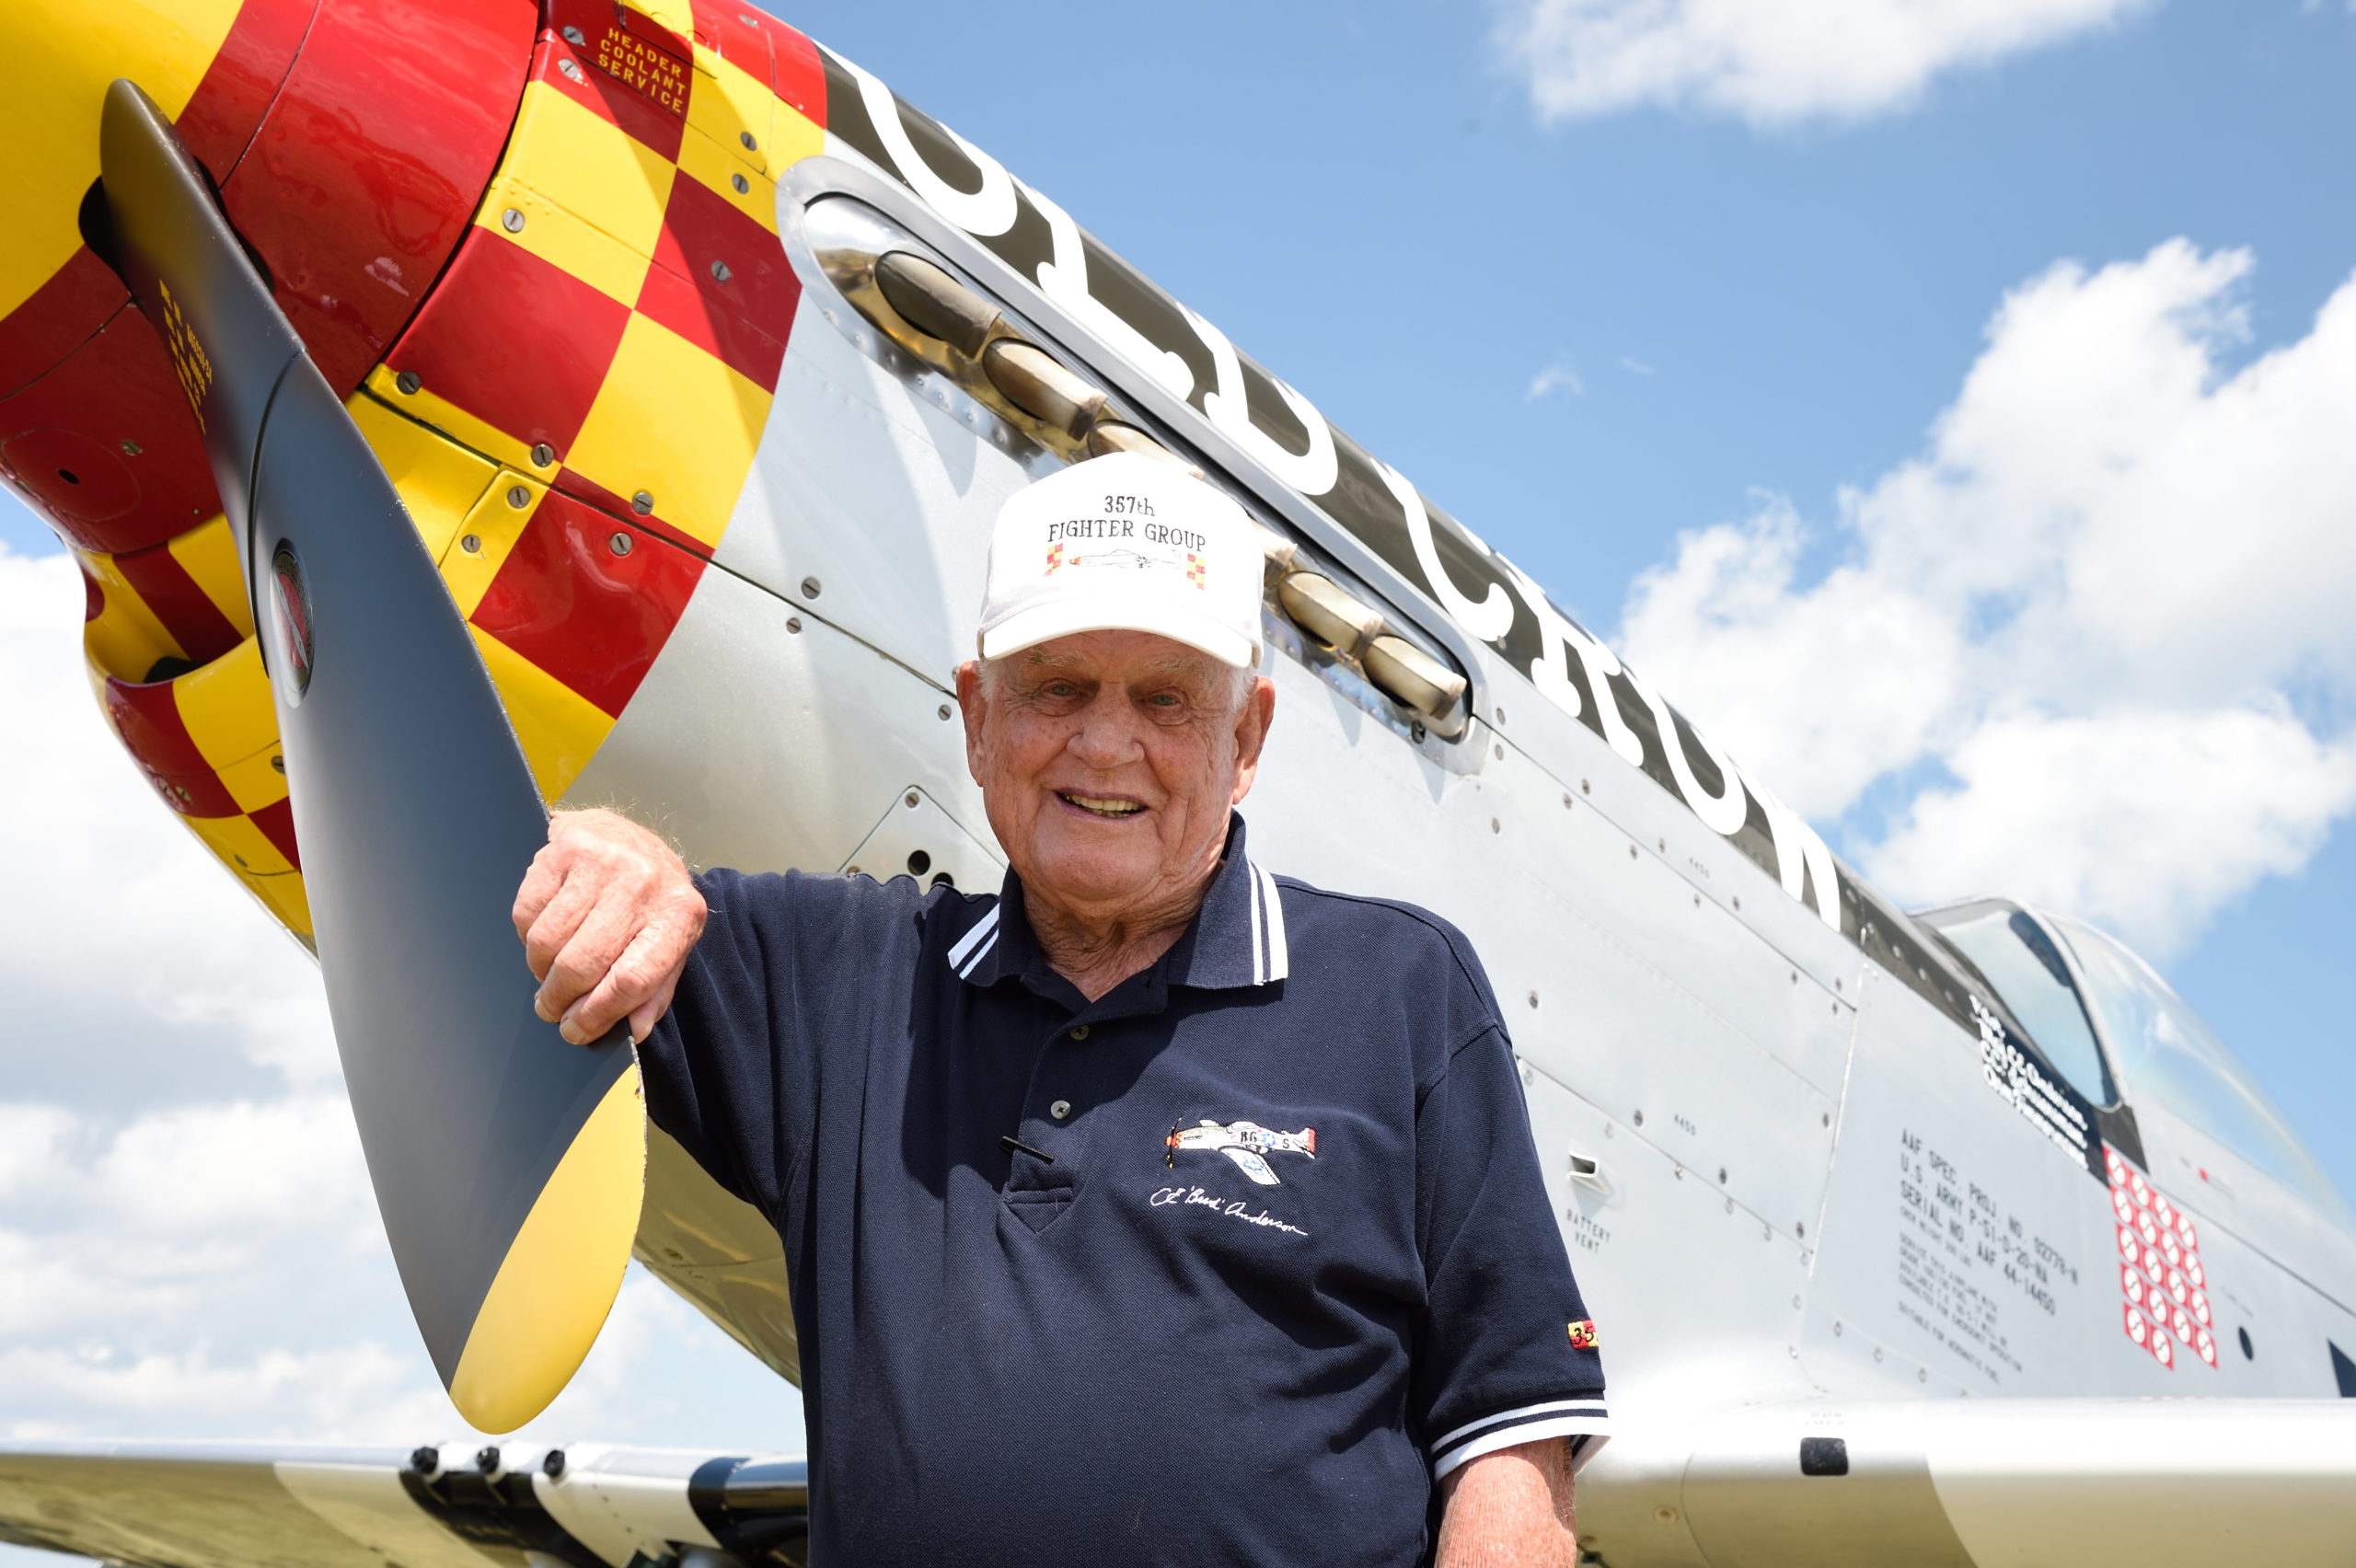 Col. Bud Anderson flew many missions in the P-51D Mustang fighter aircraft during World War II